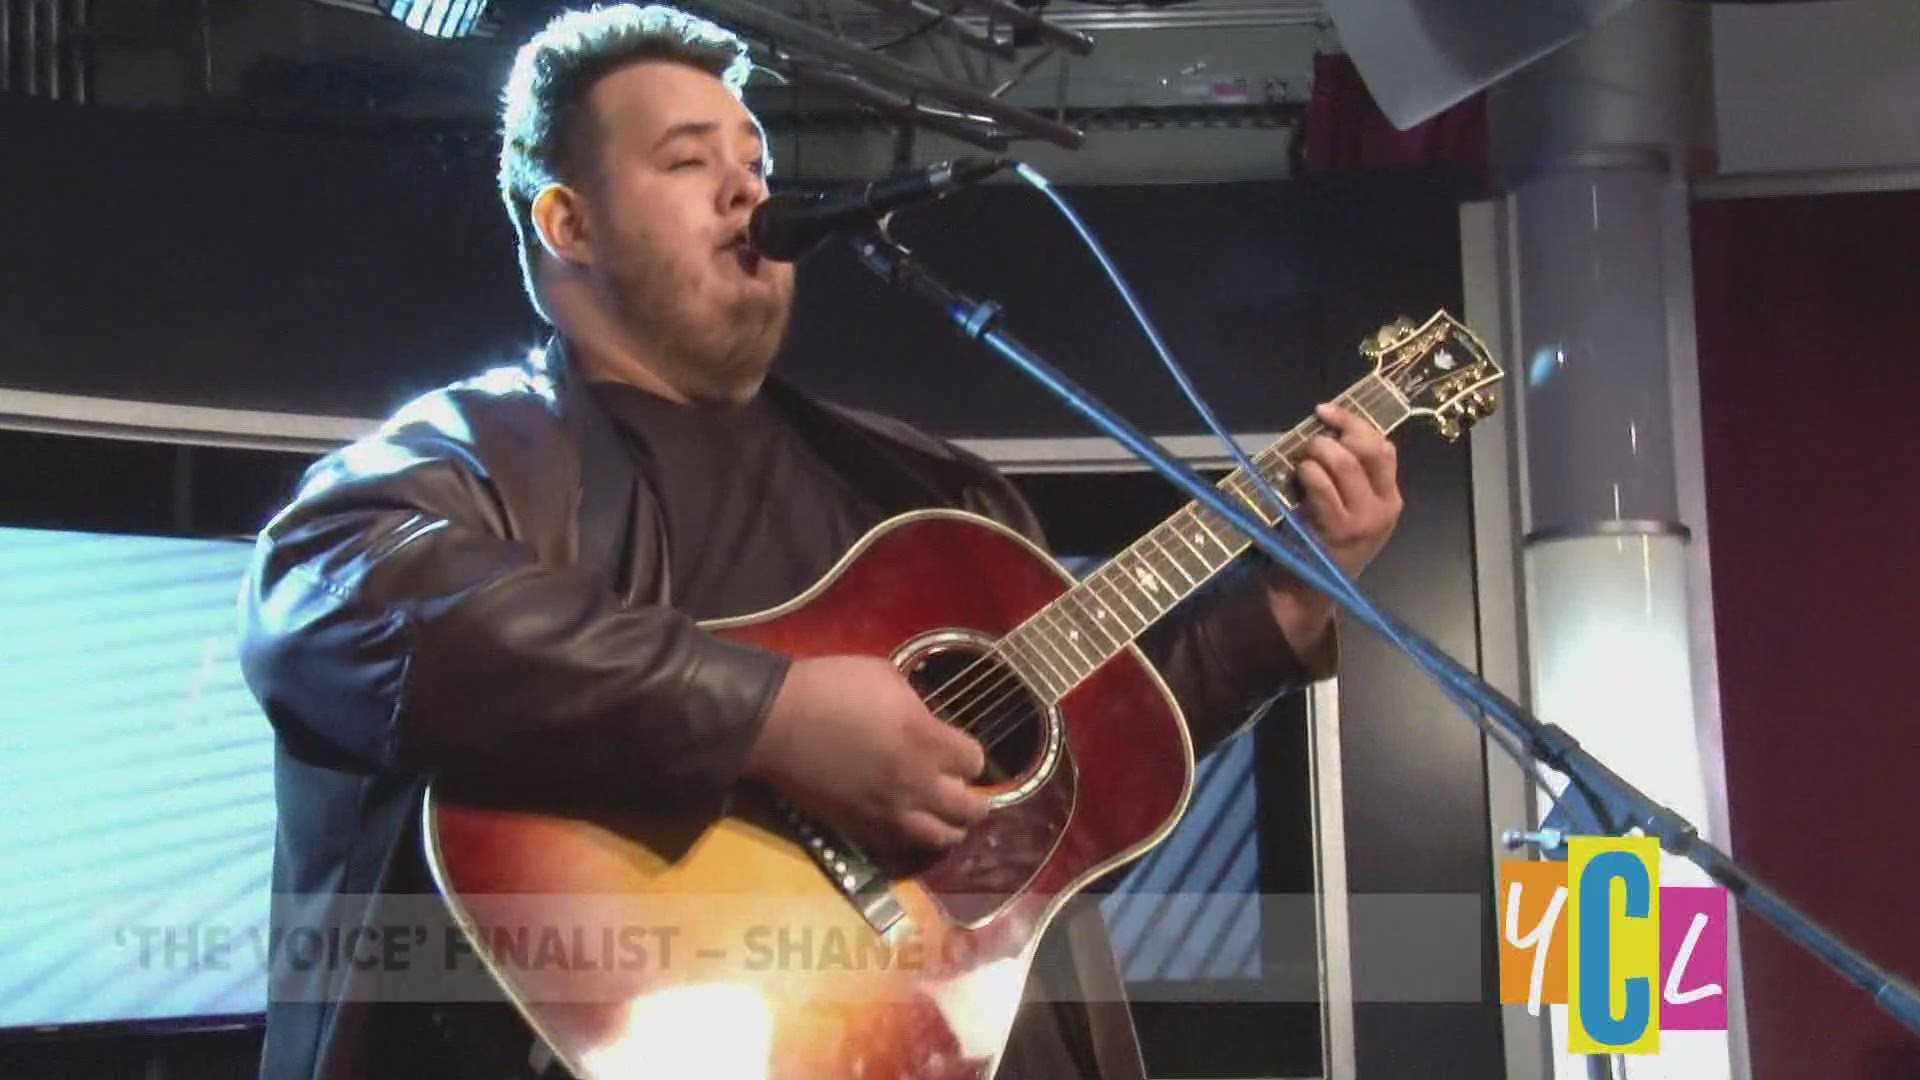 We catch up with Shane Q and he gives us a special performance!